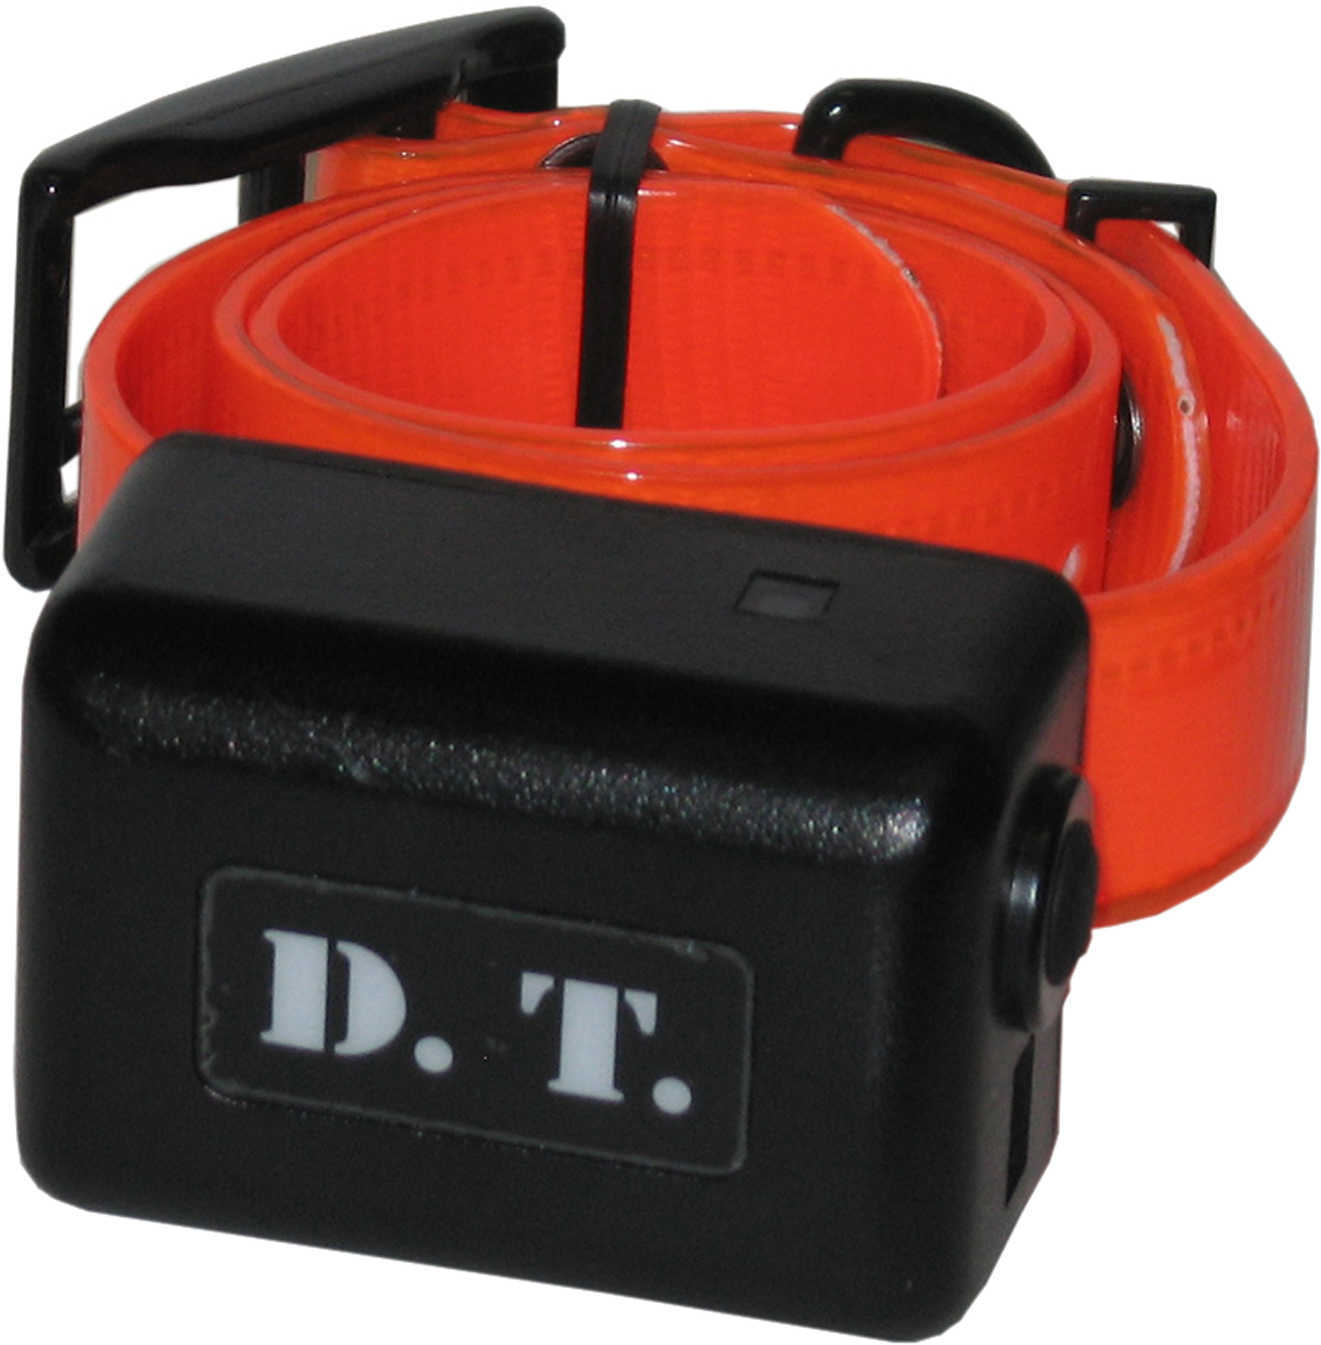 DT Systems IDT Orange Replacement Collar